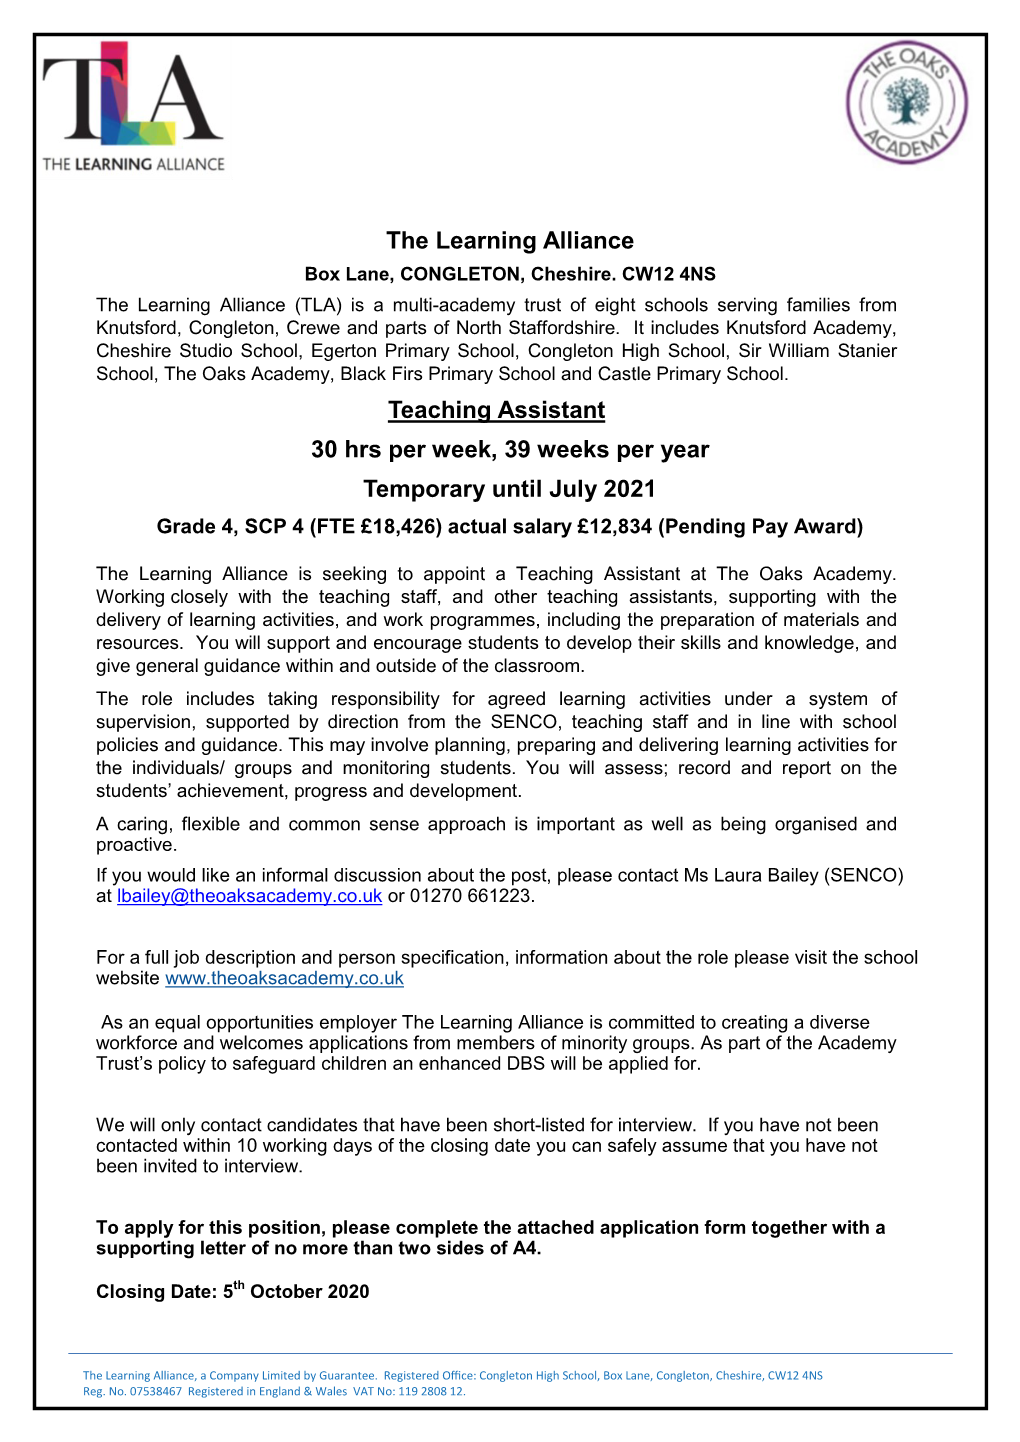 The Learning Alliance Teaching Assistant 30 Hrs Per Week, 39